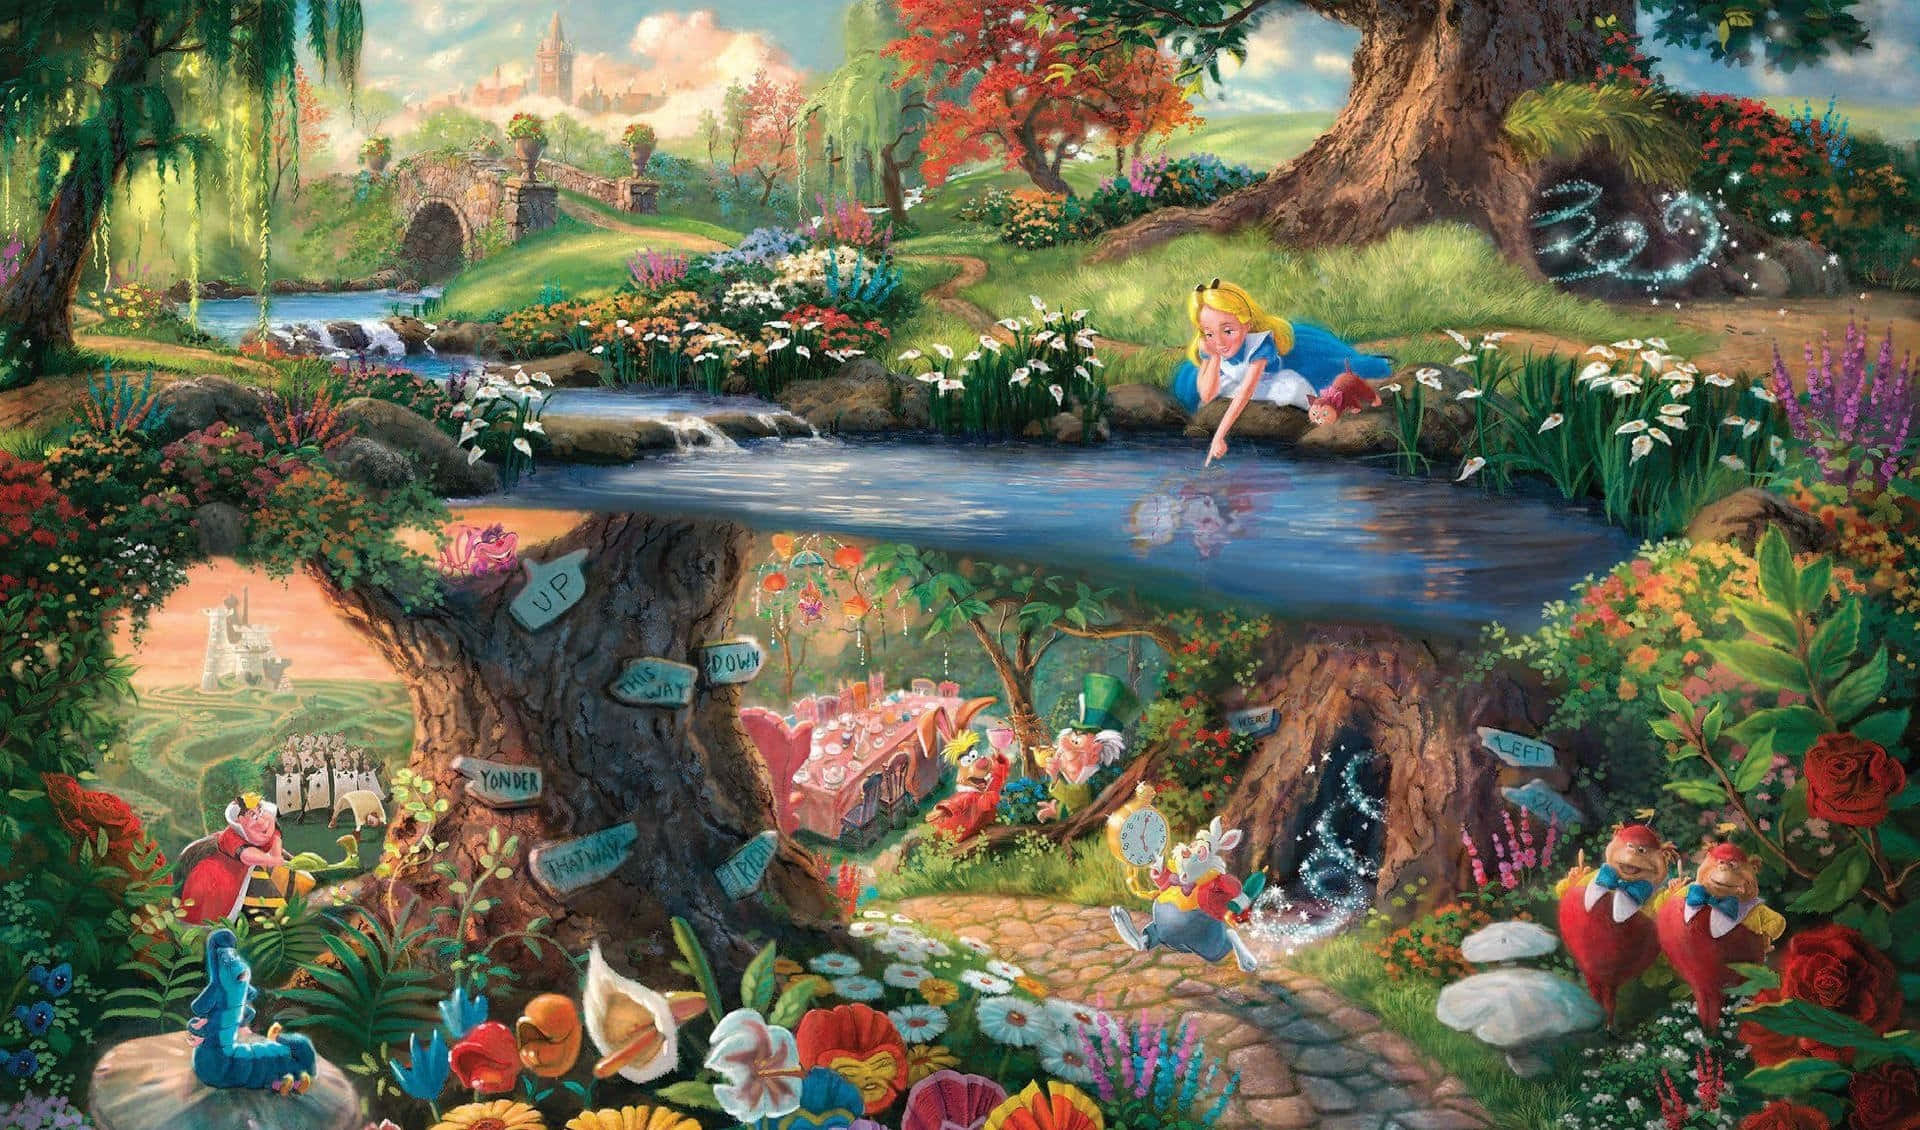 Down the Rabbit Hole and into Wonderland This was the entr